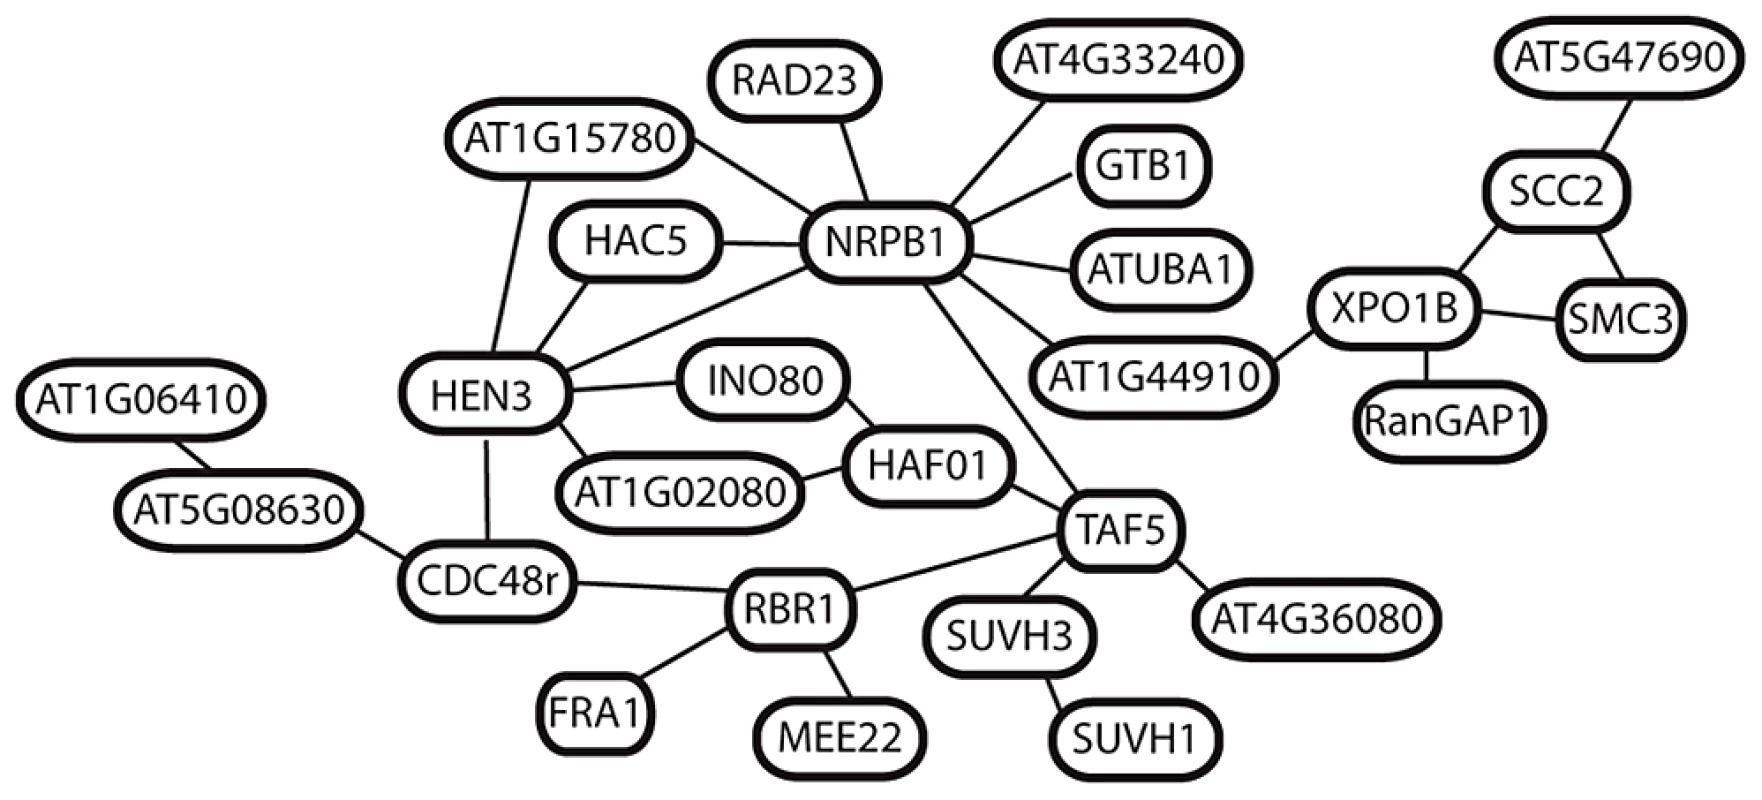 Predicted interactions among 27 putatively selected genes in <i>A. arenosa</i>.